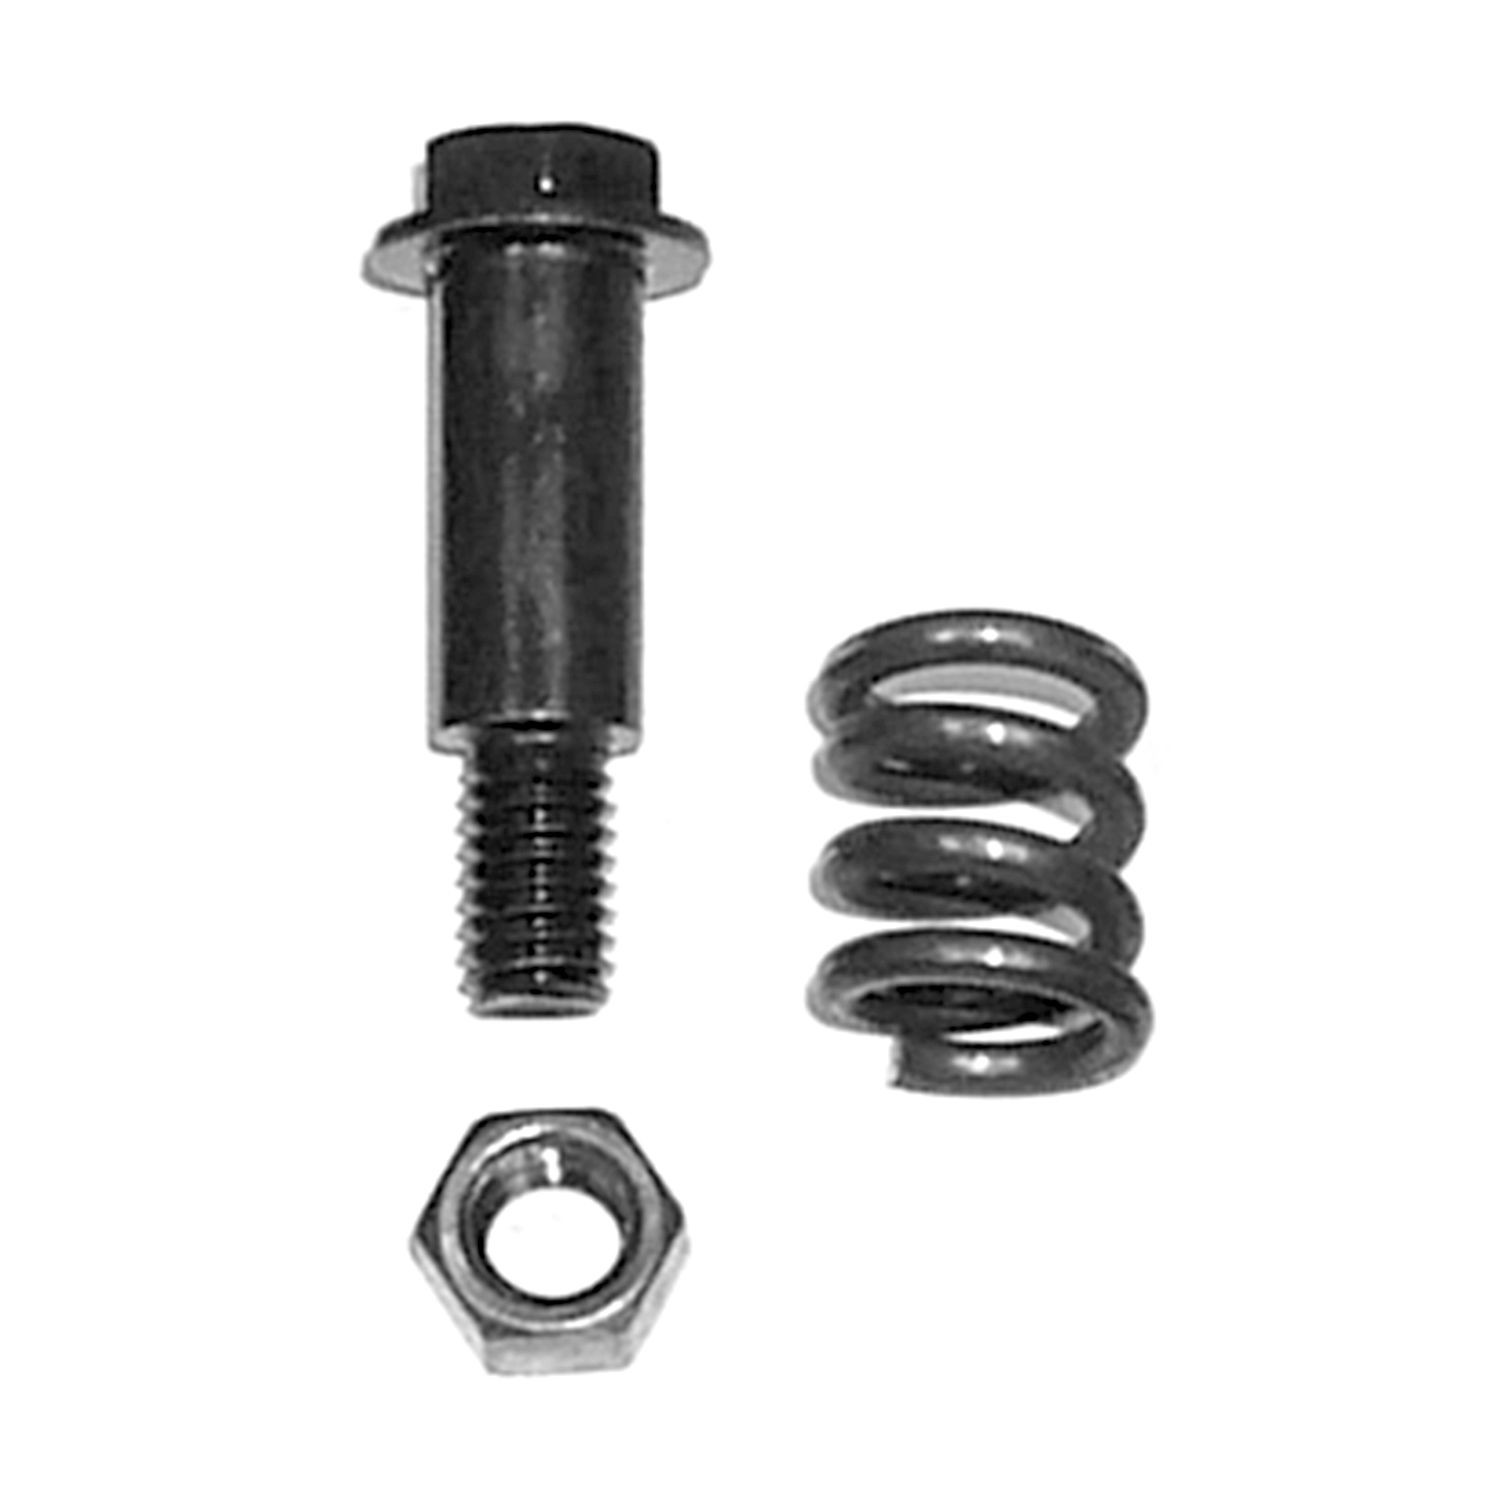 AP EXHAUST W/O FEDERAL CONVERTER - Exhaust Bolt and Spring - APK 4682